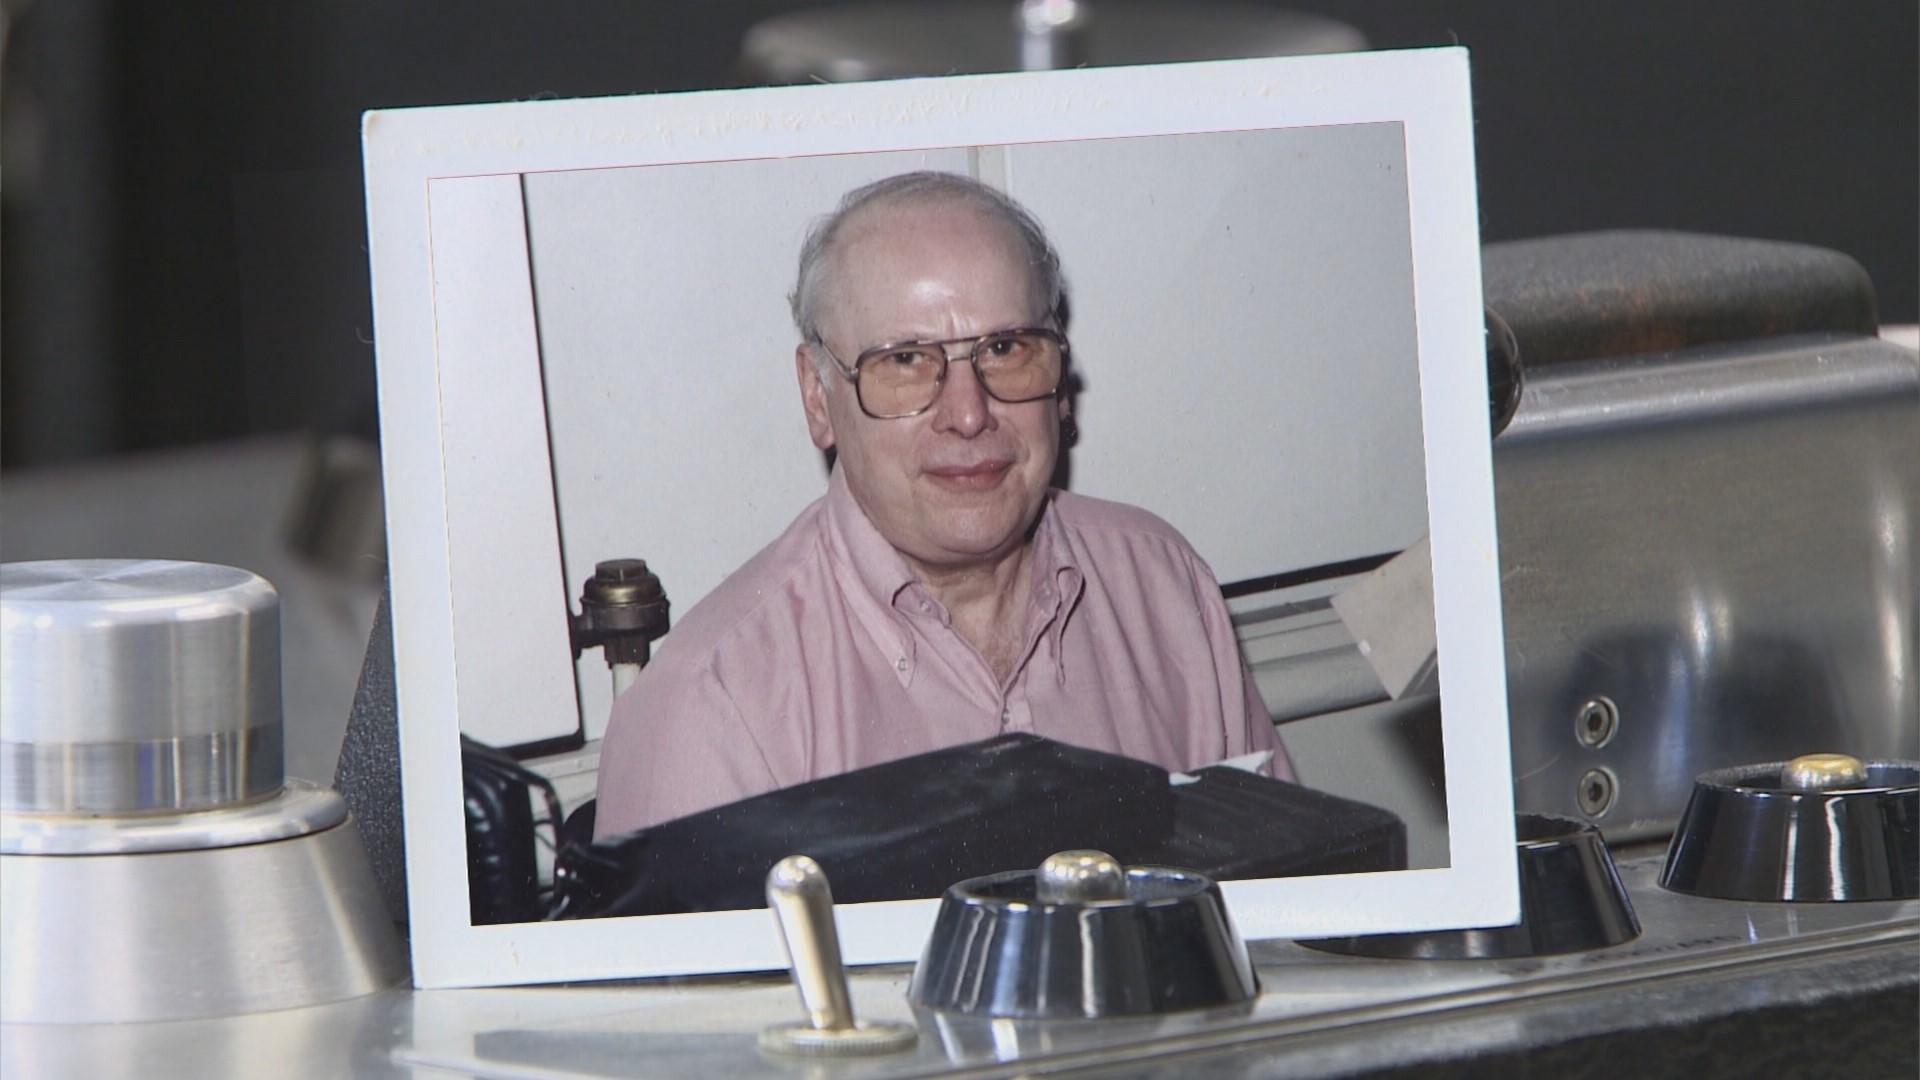 An album honoring the career of legendary Seattle record producer Kearney Barton will be released this month.